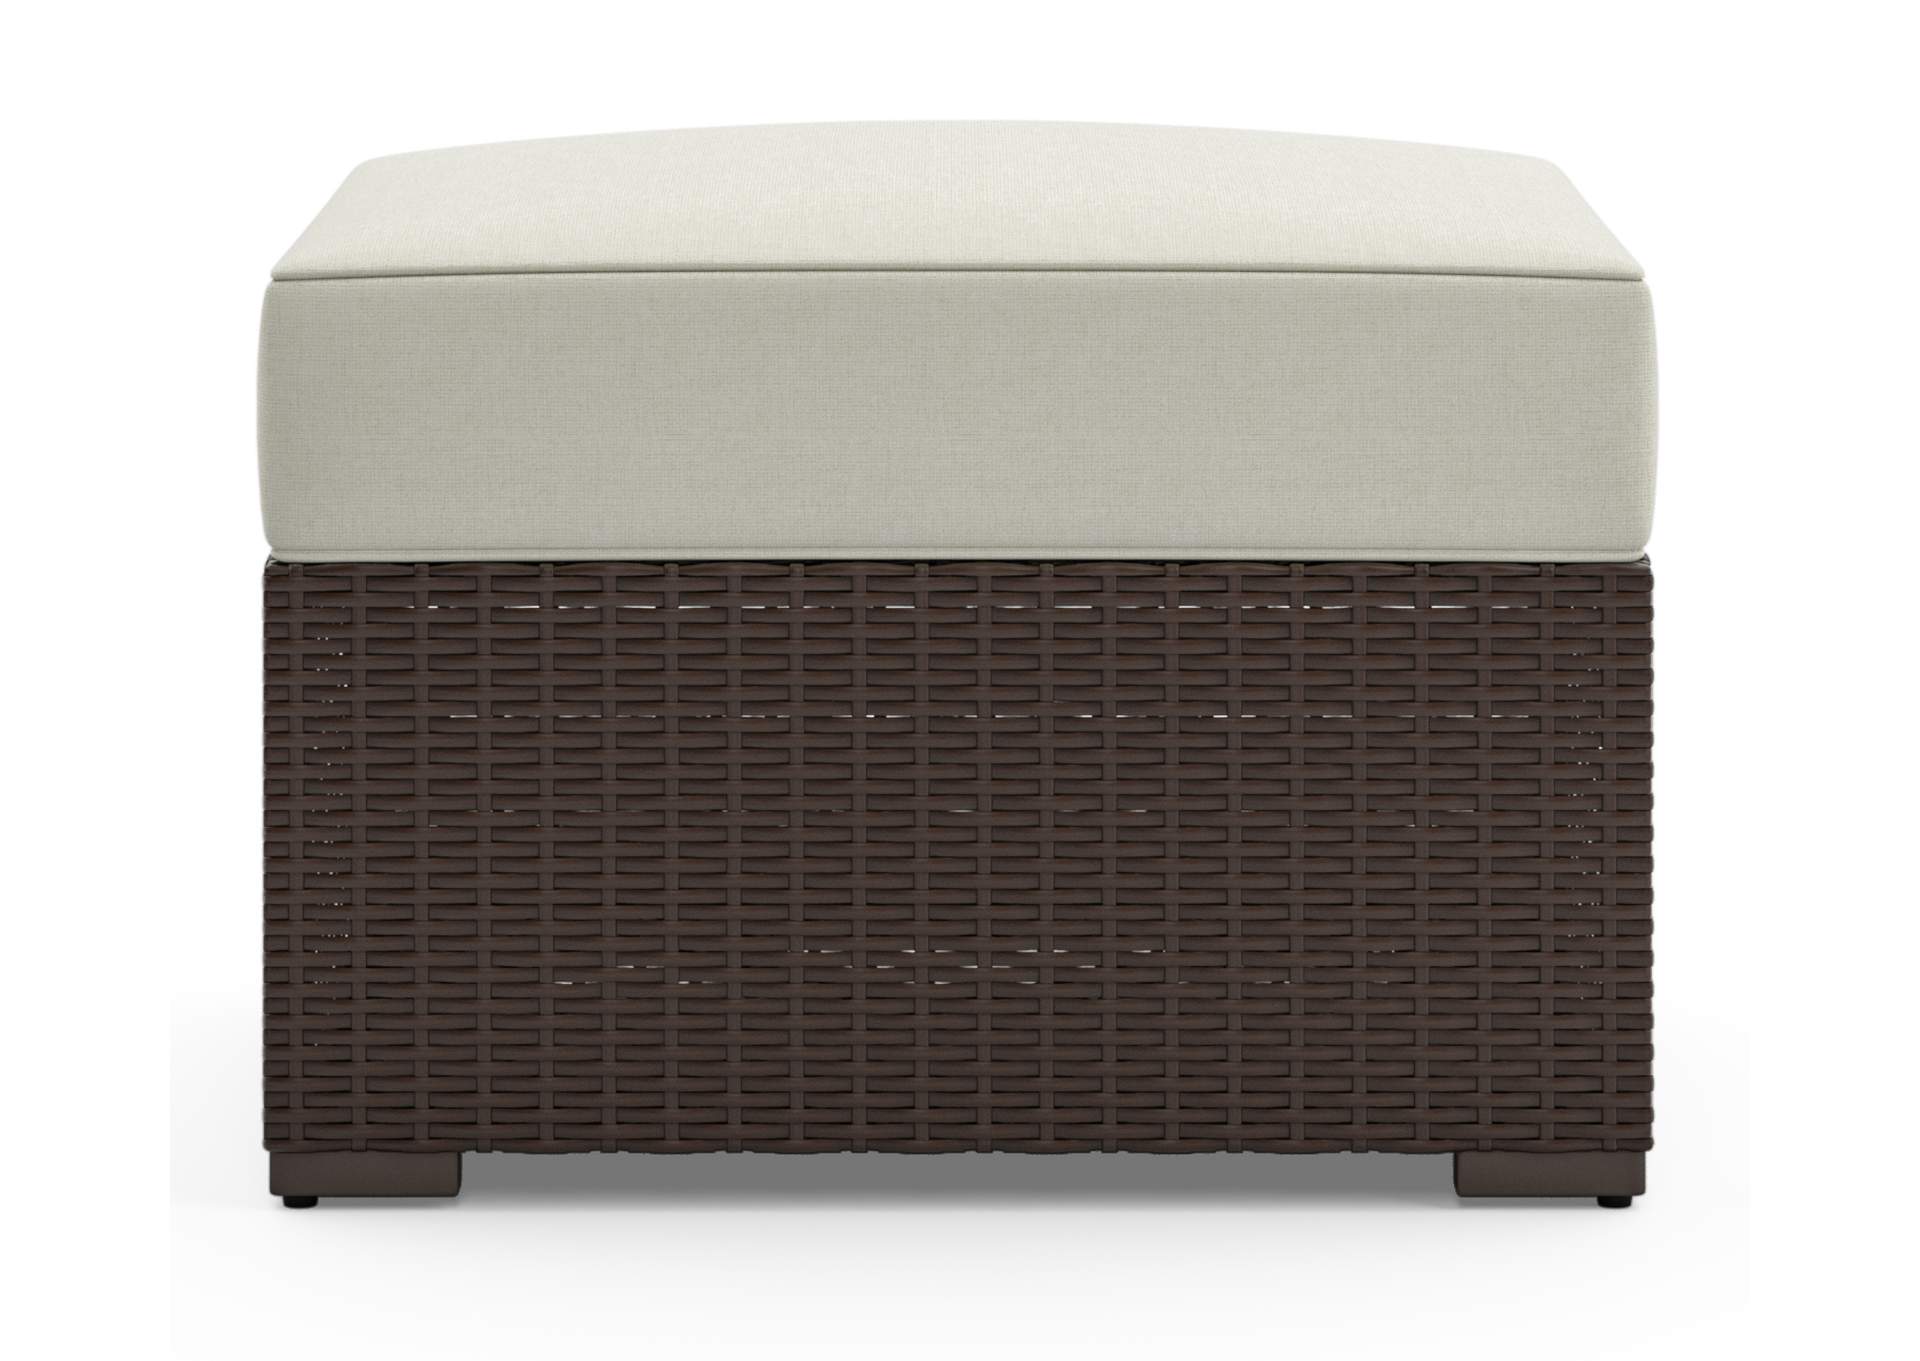 Palm Springs Outdoor Ottoman By Homestyles,Homestyles